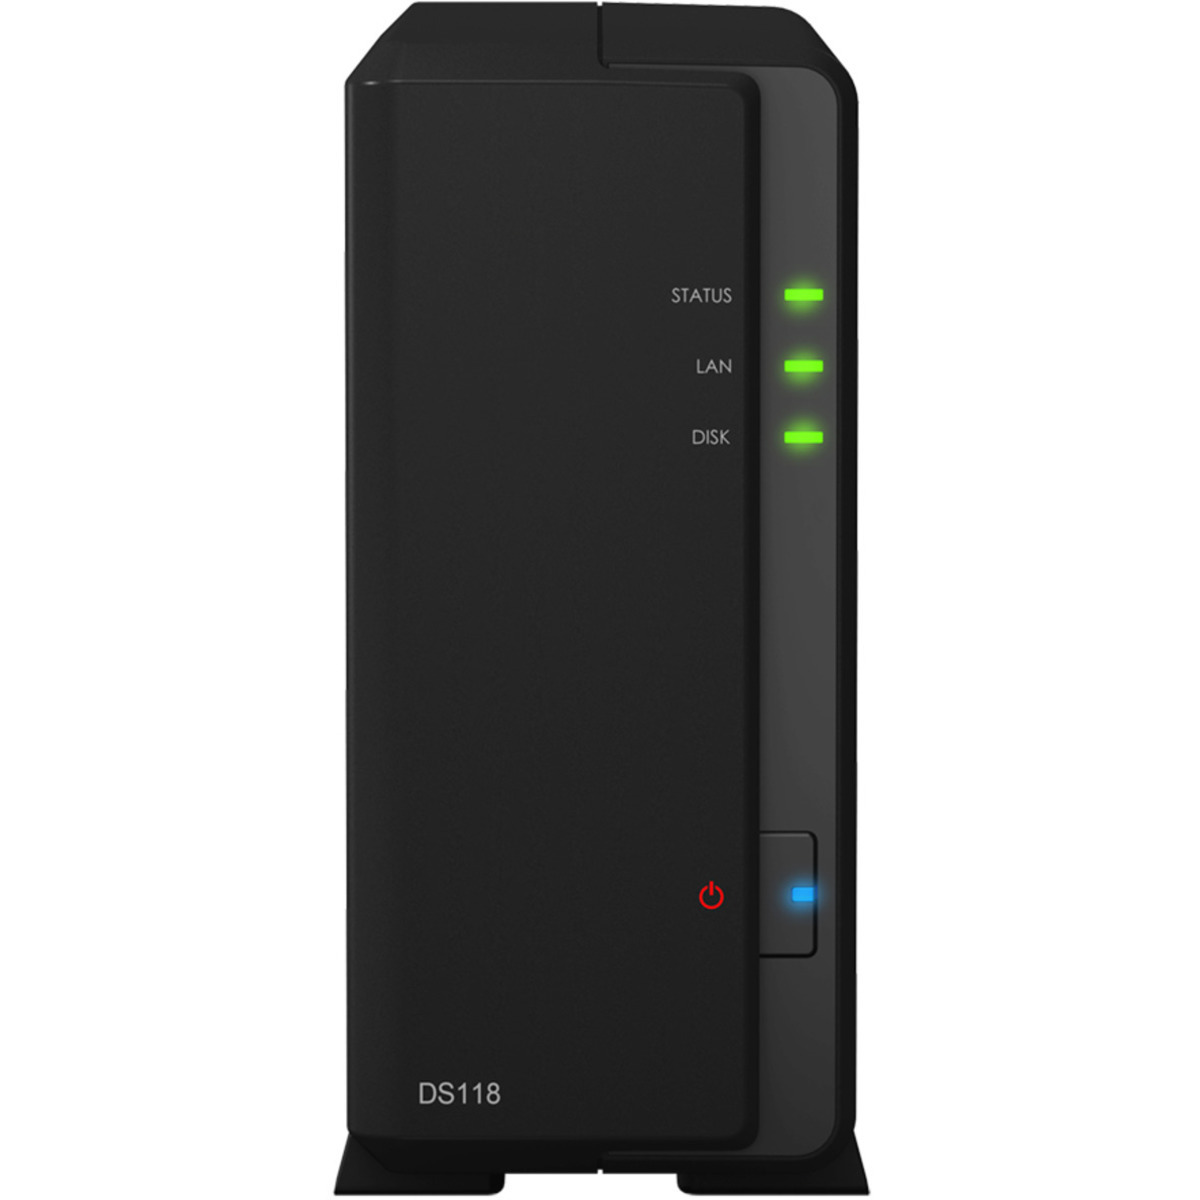 buy $474 Synology DiskStation DS118 8tb Desktop NAS - Network Attached Storage Device 1x8000gb Toshiba Enterprise Capacity MG08ADA800E 3.5 7200rpm SATA 6Gb/s HDD ENTERPRISE Class Drives Installed - Burn-In Tested - ON SALE - nas headquarters buy network attached storage server device das new raid-5 free shipping usa christmas new year holiday sale DiskStation DS118